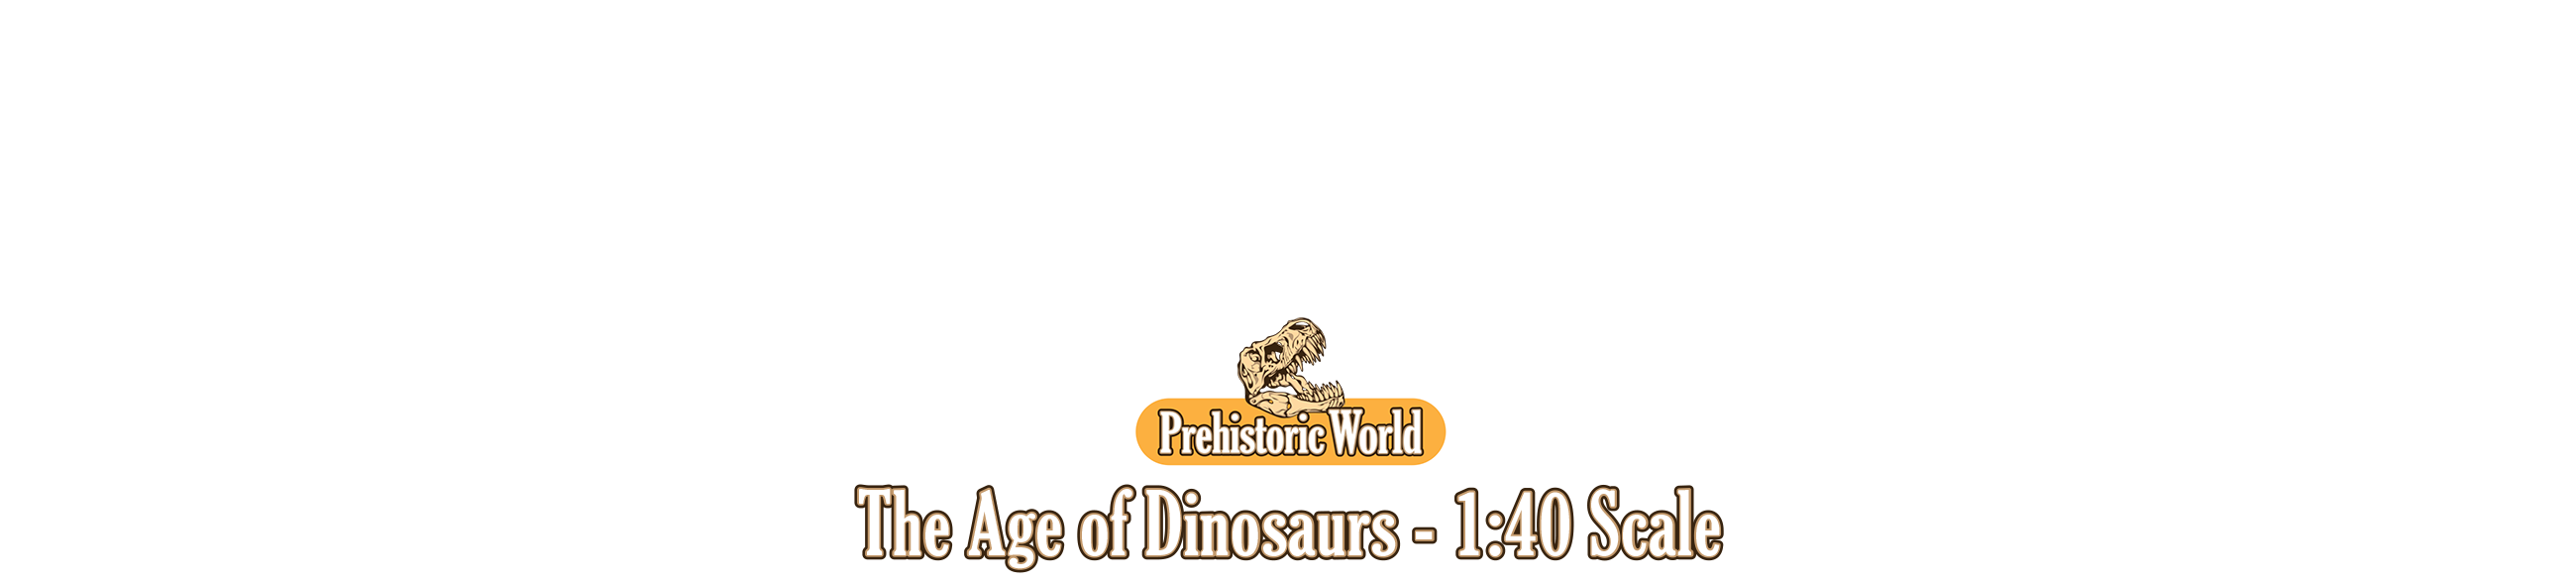 Age of Dinosaurs - 1:40 Scale